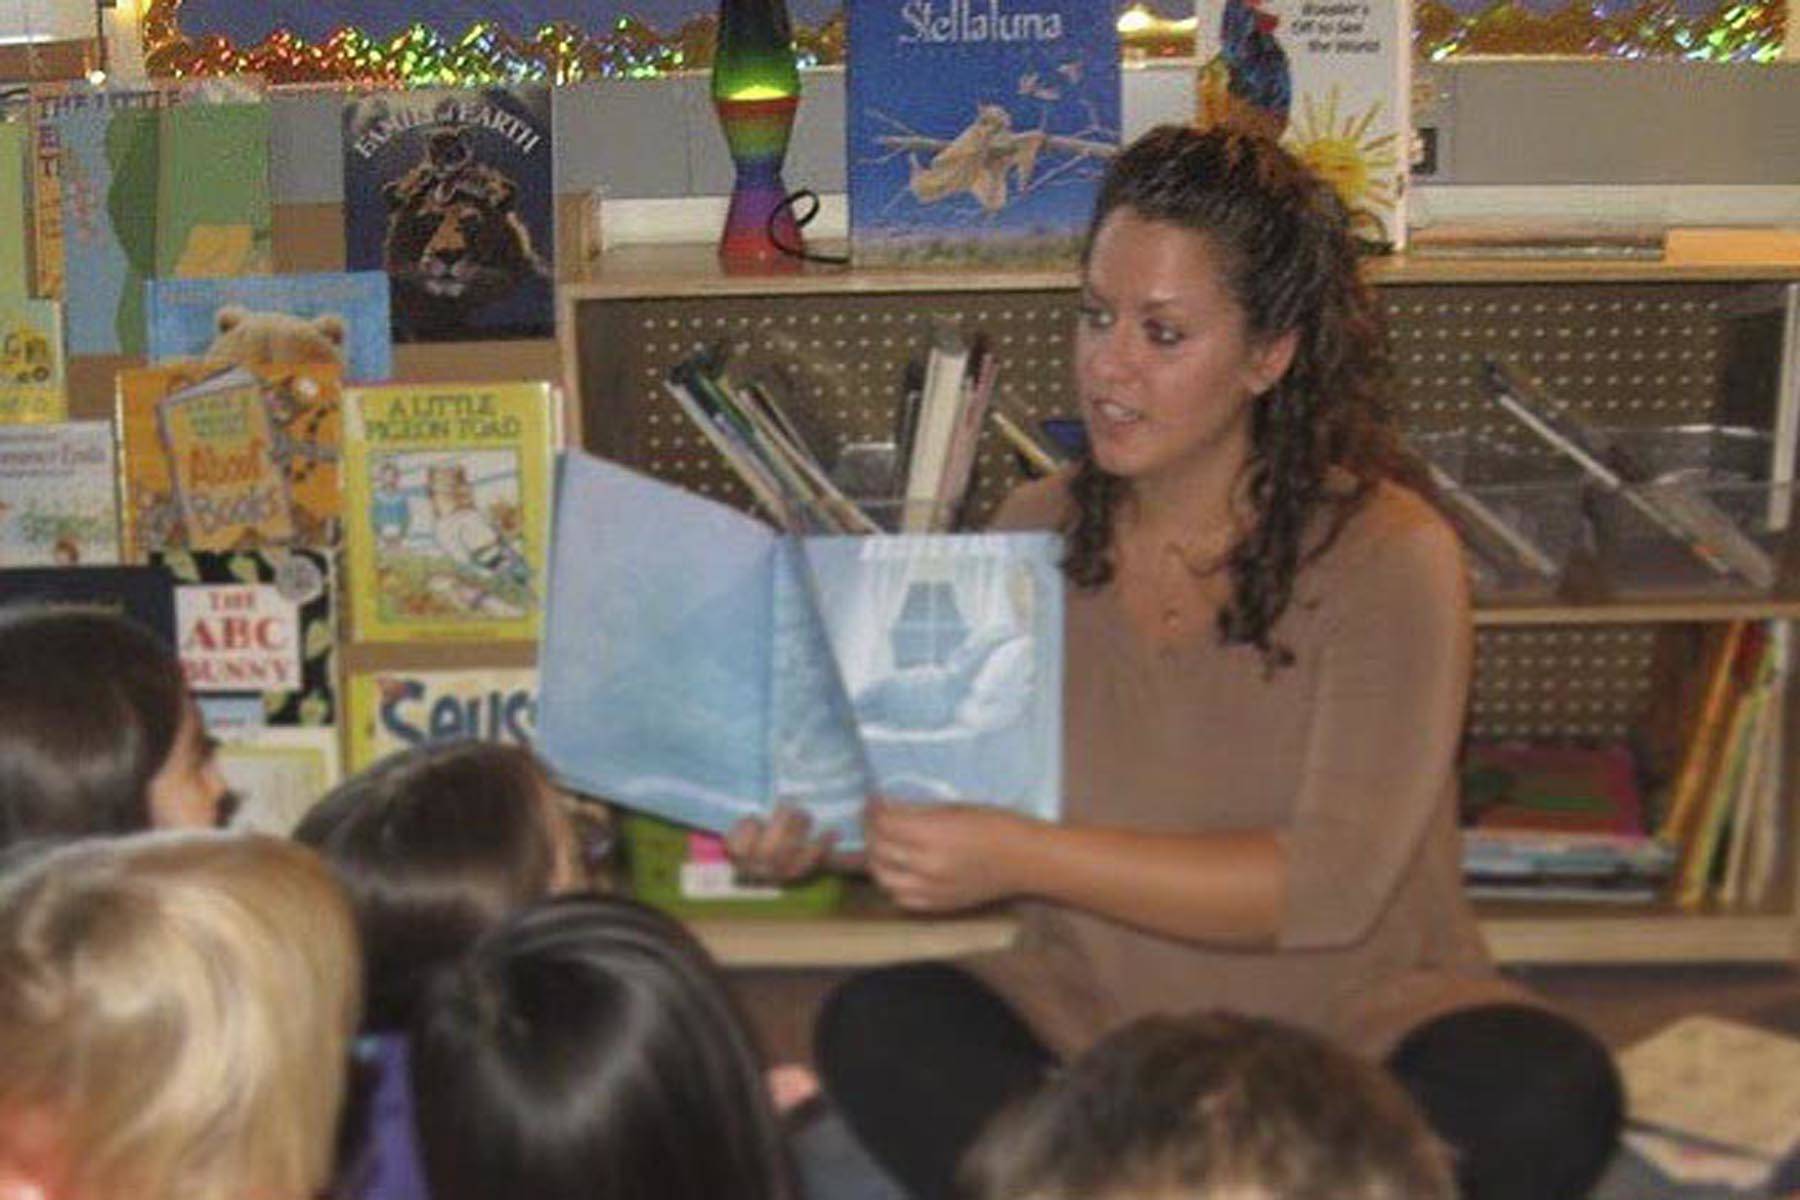 Courtesy photo | Katy Martin                                 Katy Martin, seen here teaching at Riverbend Elementary School, is a former Riverbend teacher filling in to teach fifth-graders here remotely from Virginia.